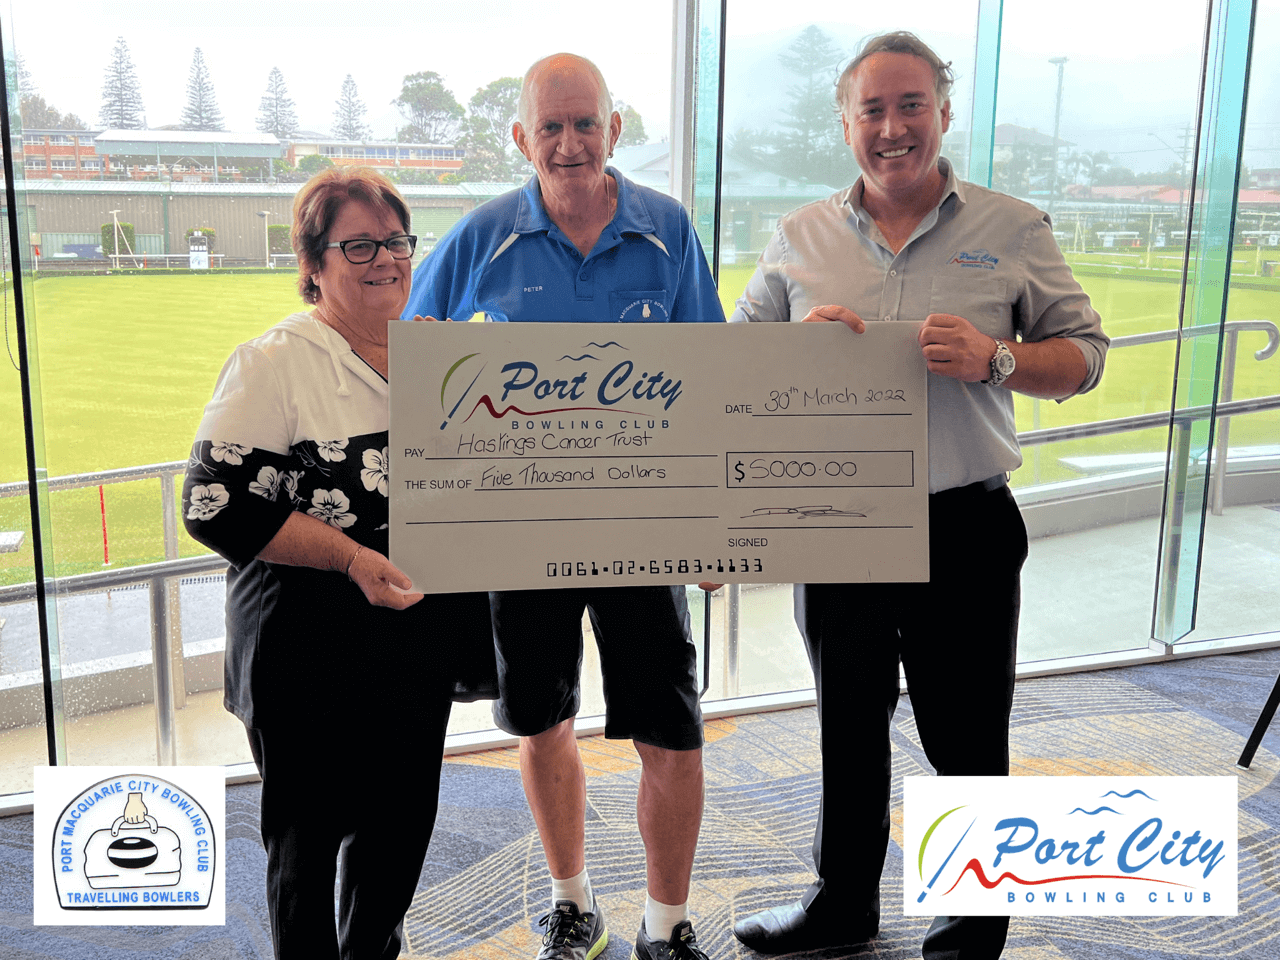 David Gearing, CEO of Port City Bowling Club & Peter Wholohan of Port City Travelling Bowlers presenting the cheque for the proceeds of the recent Barefoot Bowls Fundraising event. A fantastic $5,500 was raised. image